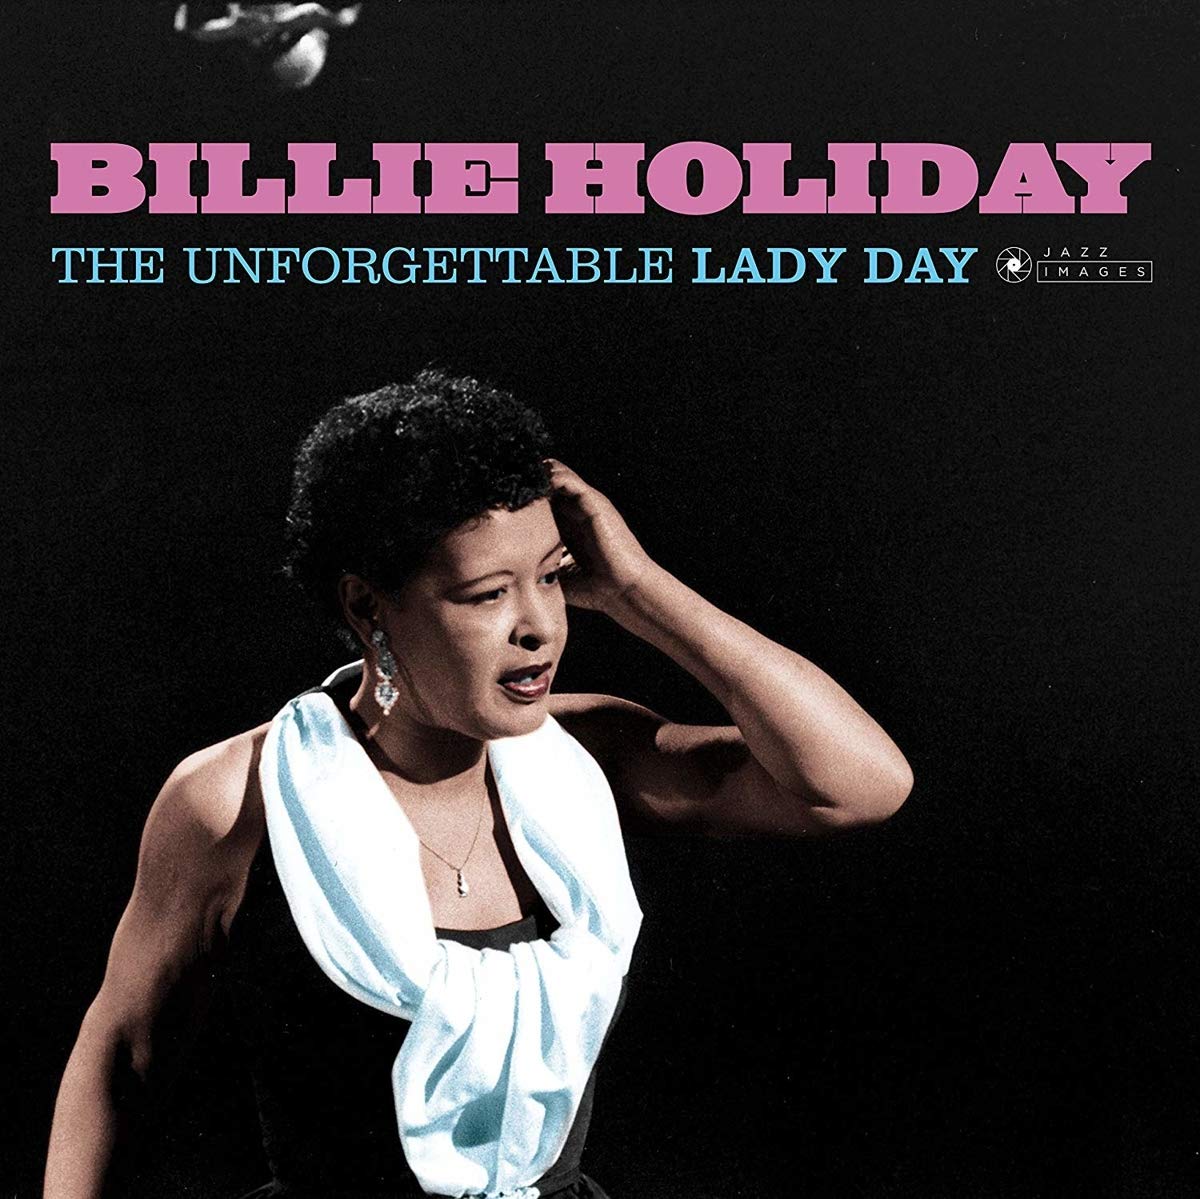 The Unforgettable Lady Day